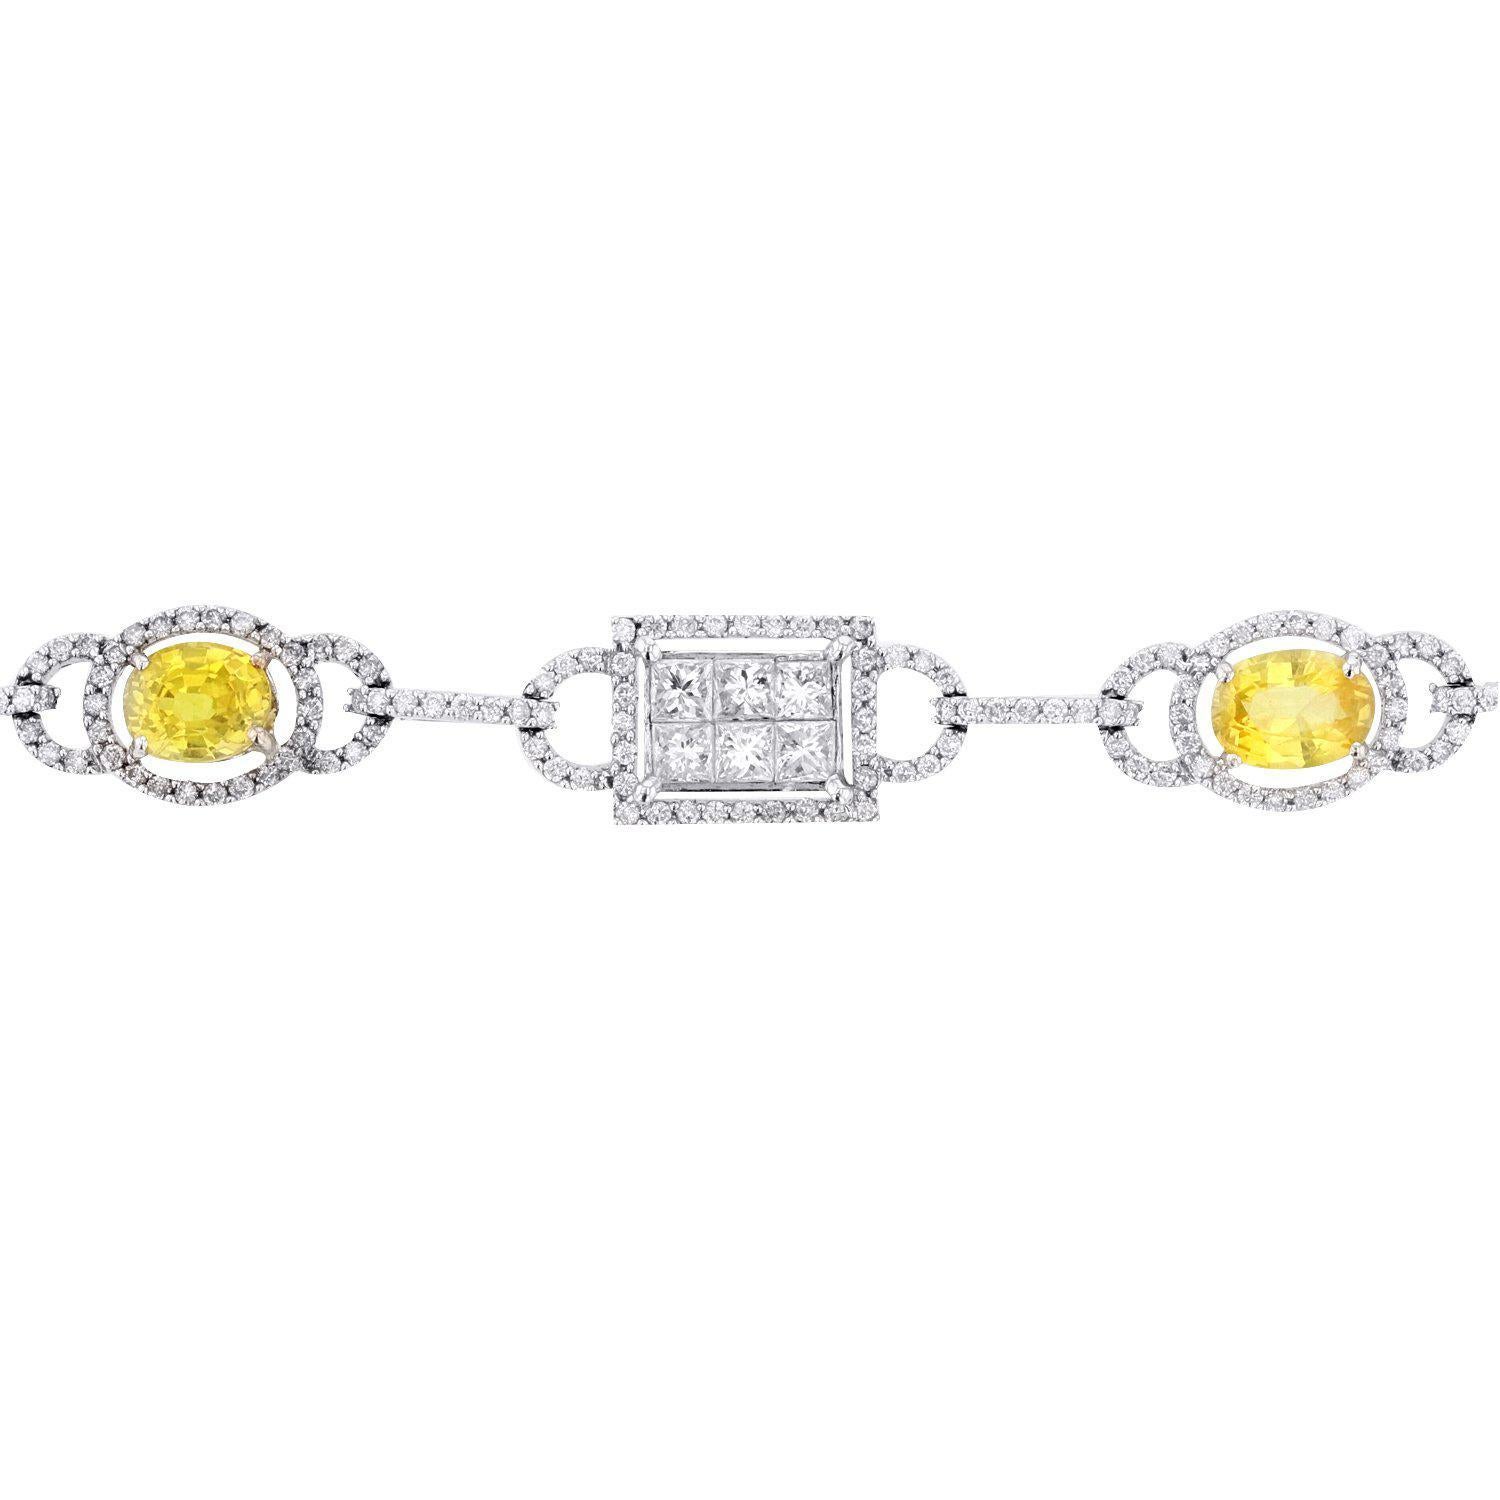 Completed in RTF electronically tested 18KT white gold ladies cast & assembled yellow sapphire and diamond necklace.  Sixteen and one-quarter inch length necklace features a stylized flexible yellow sapphire and diamond ribbon, terminating in a